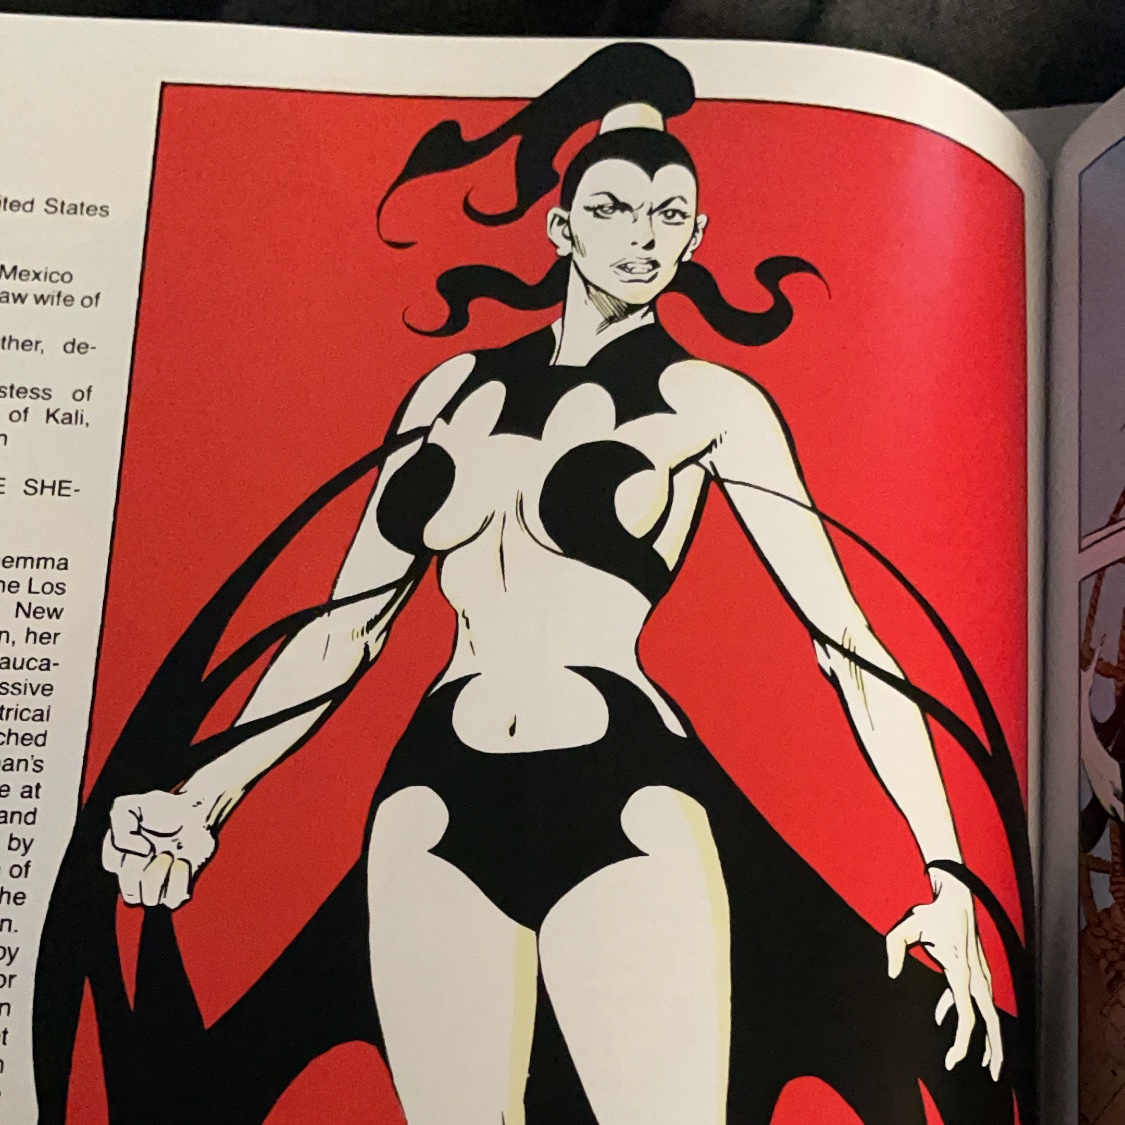 Obsessed with all the Drag Looks in the Deluxe Handbook to the Marvel Universe cc:  @CerebroCast